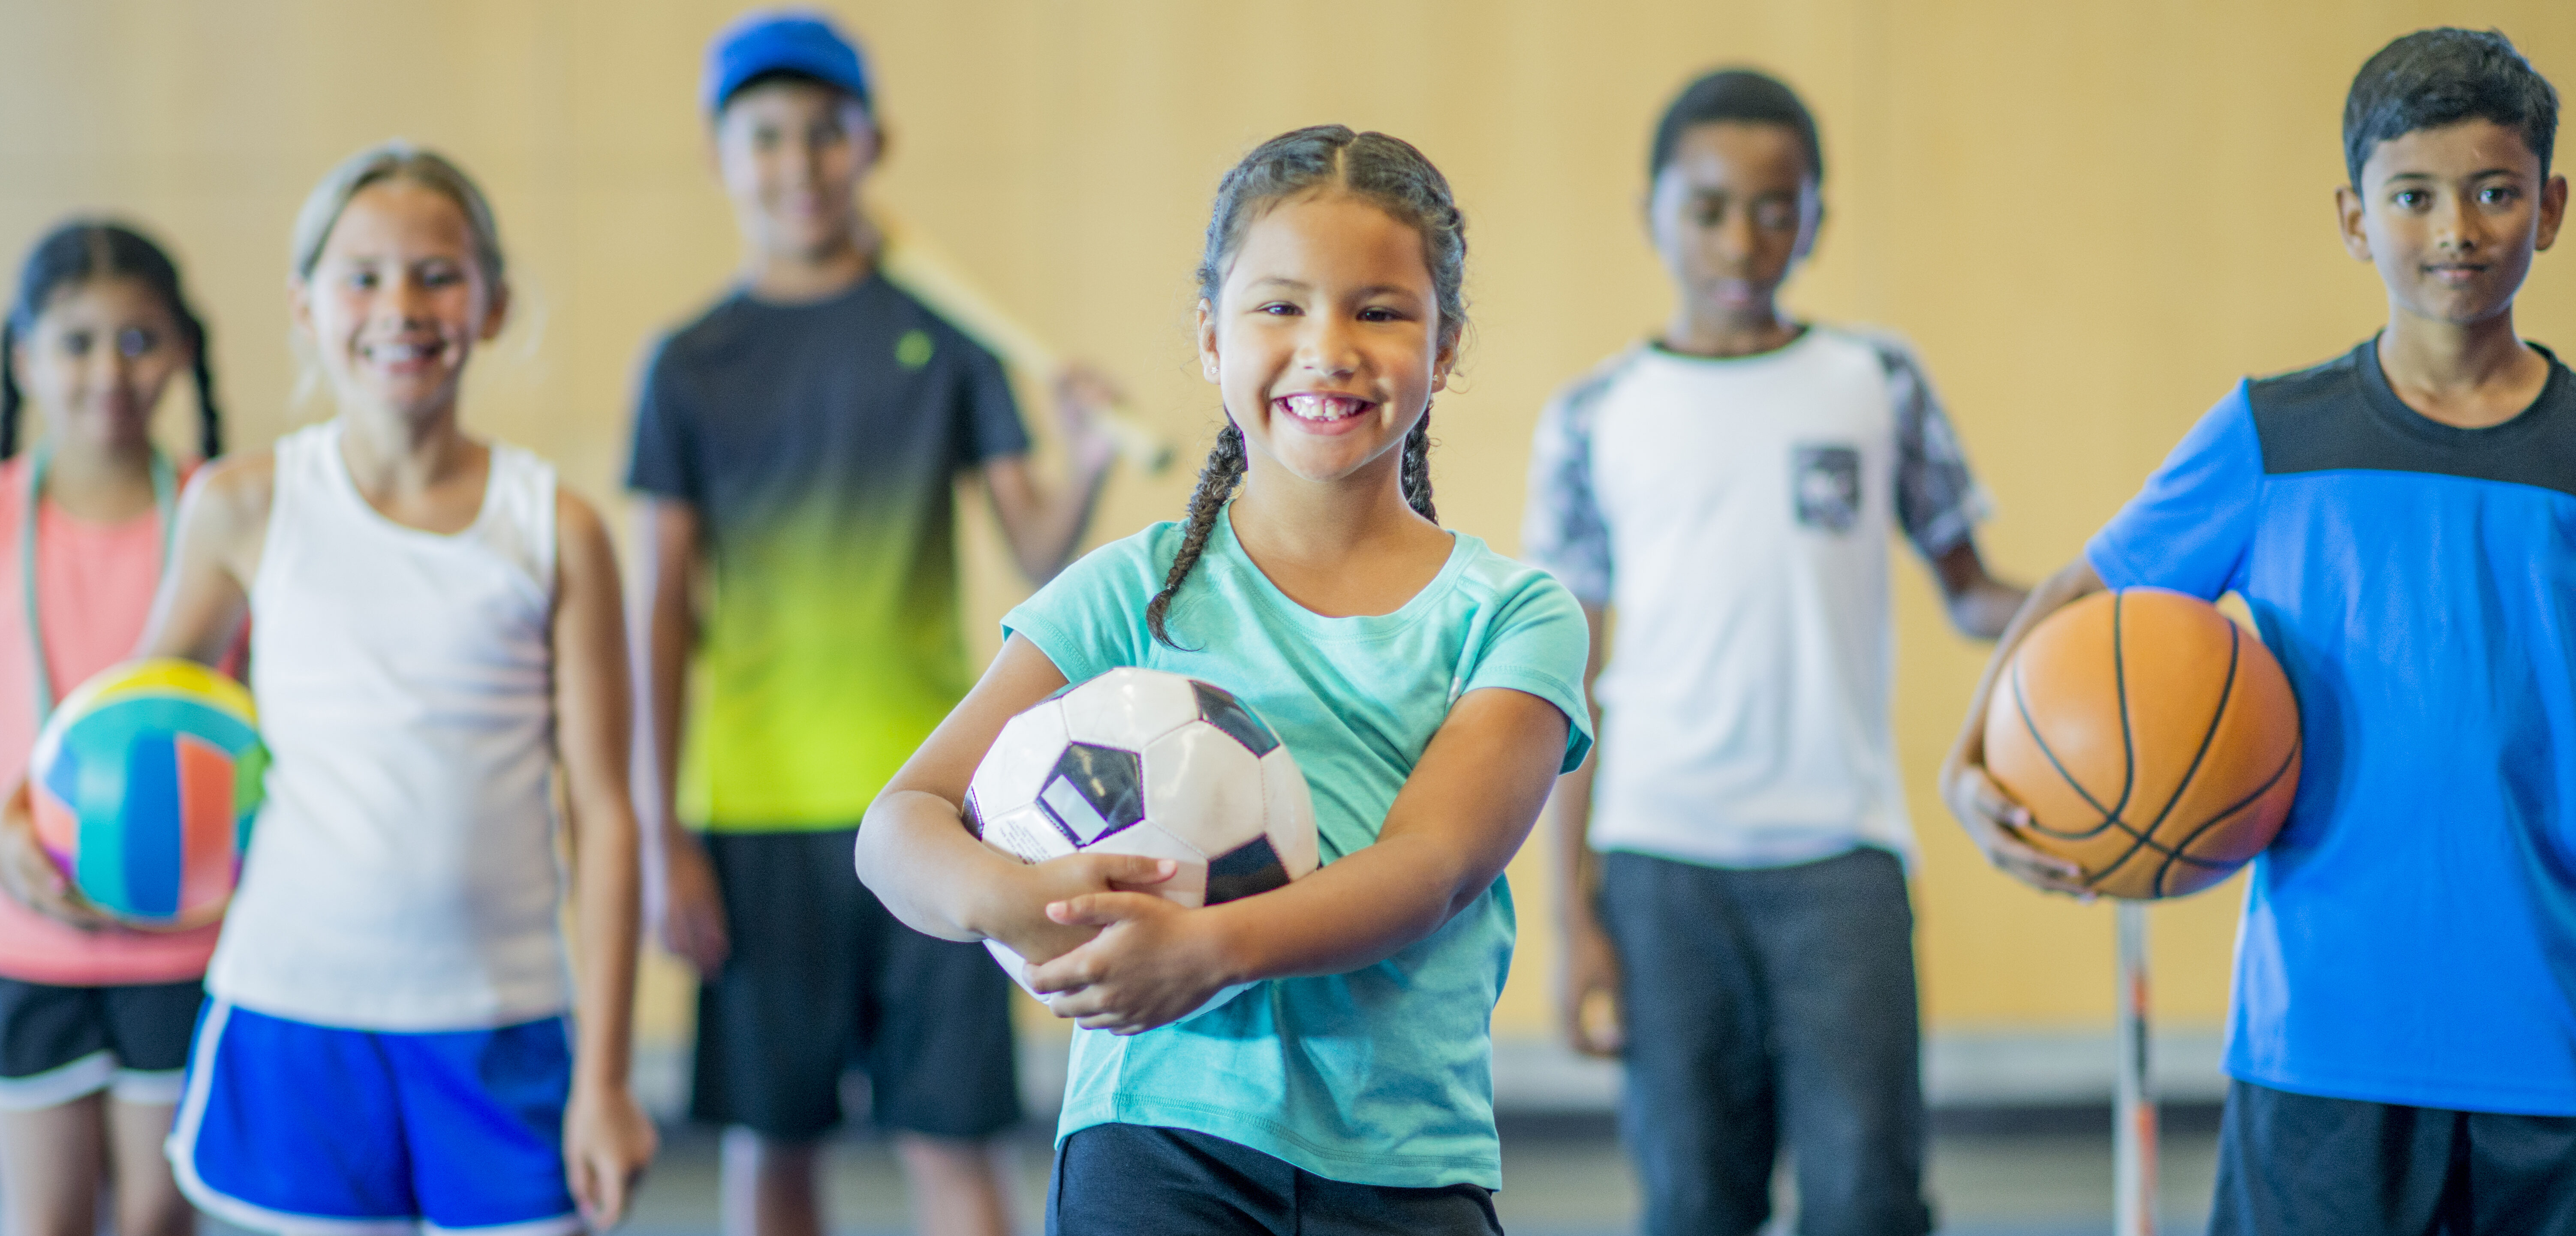 Sports Specialization: Why Balance is Healthy for Young Athletes